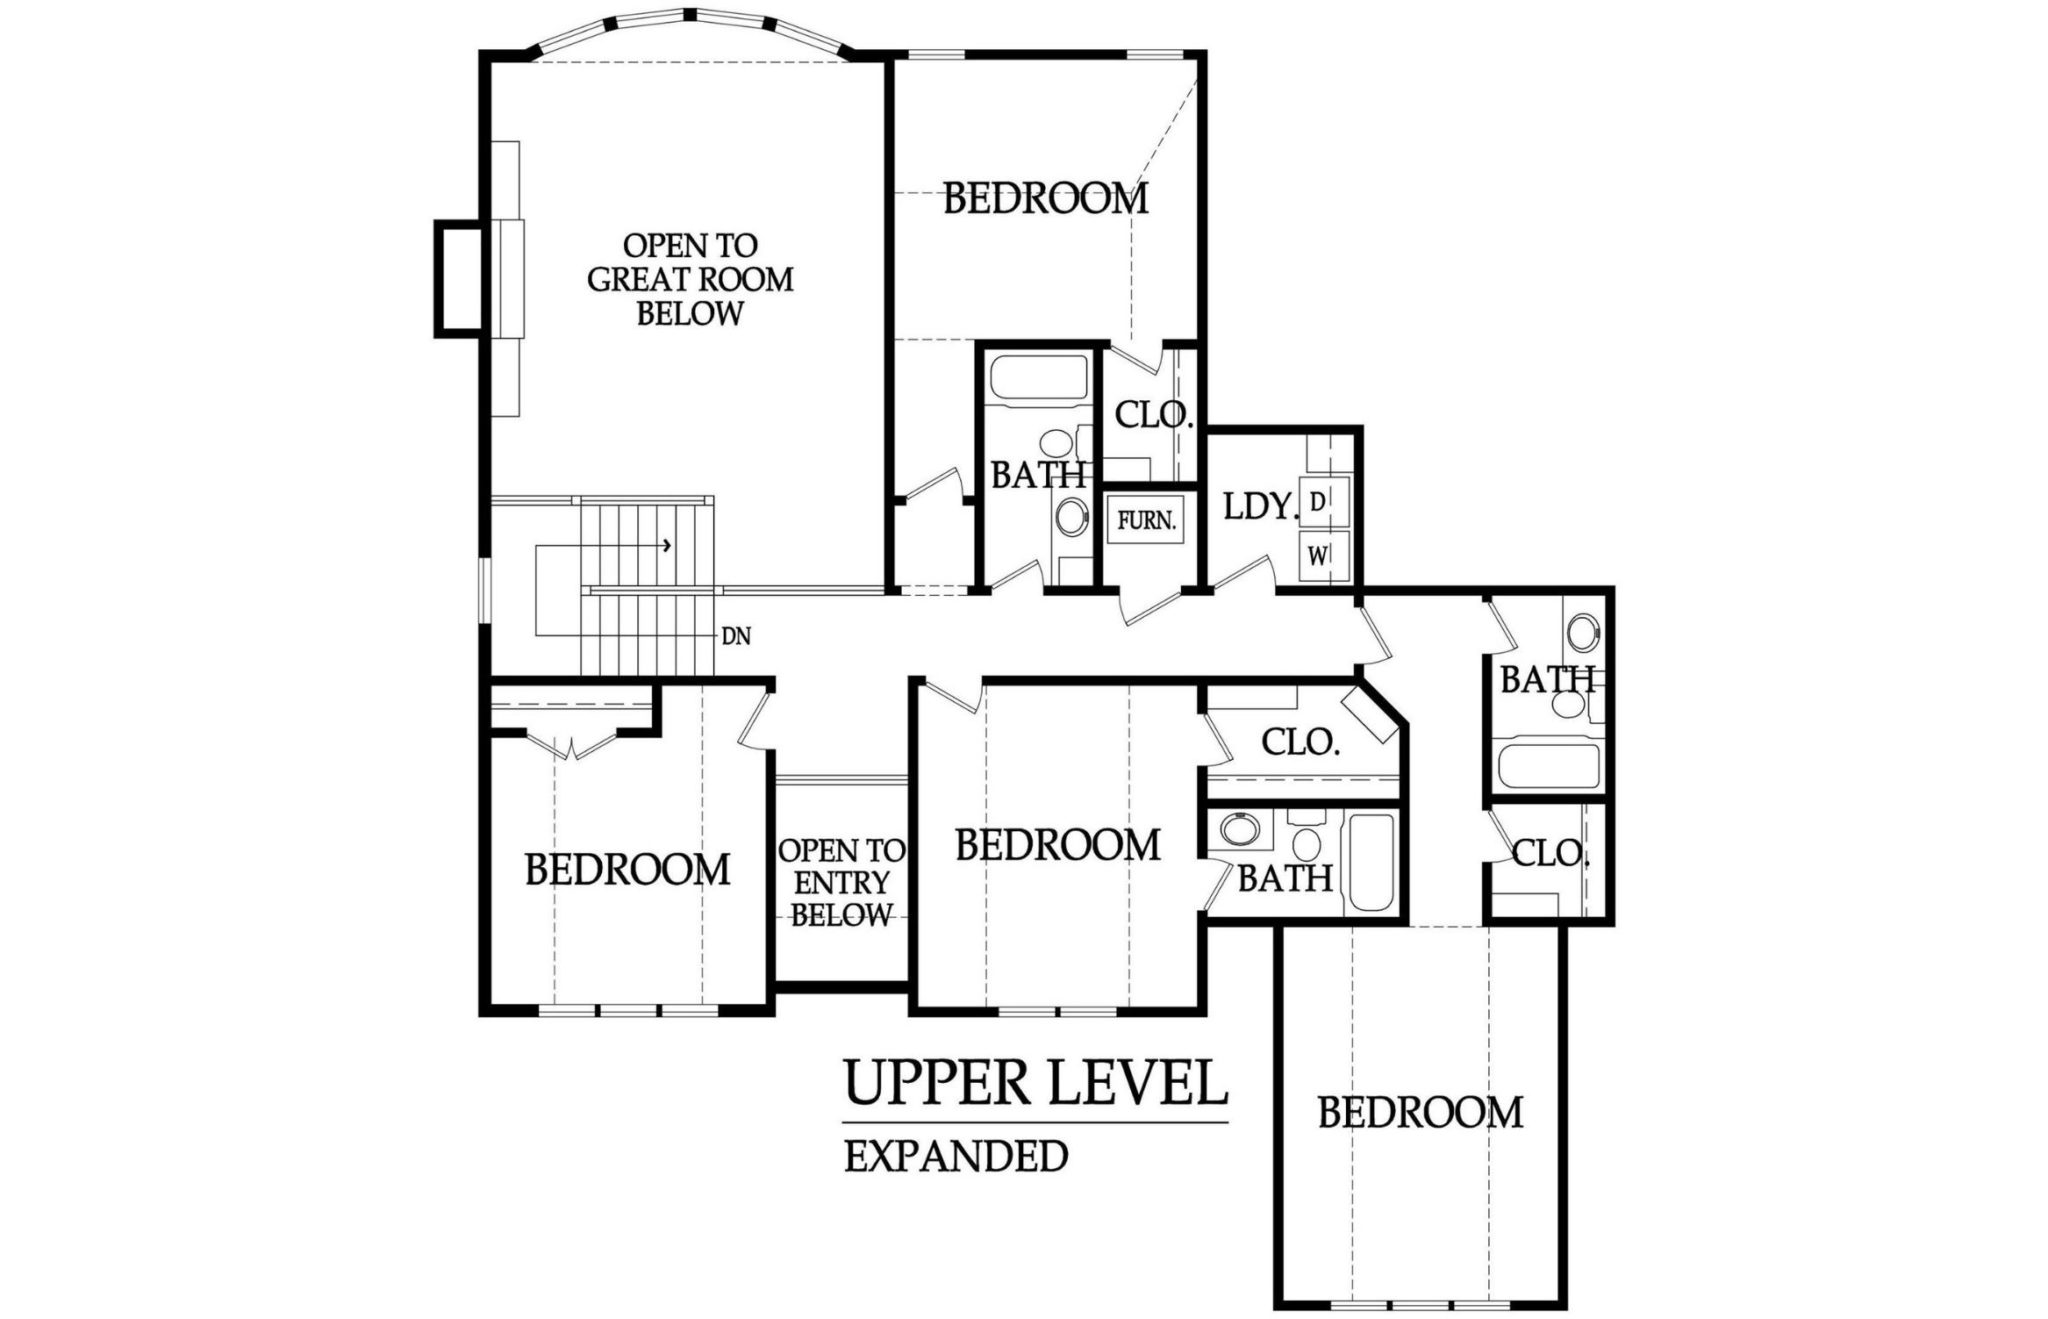 The upper level of the Jefferson farmhouse floor plan includes four secondary bedrooms, three full bathrooms, and an optional laundry room.